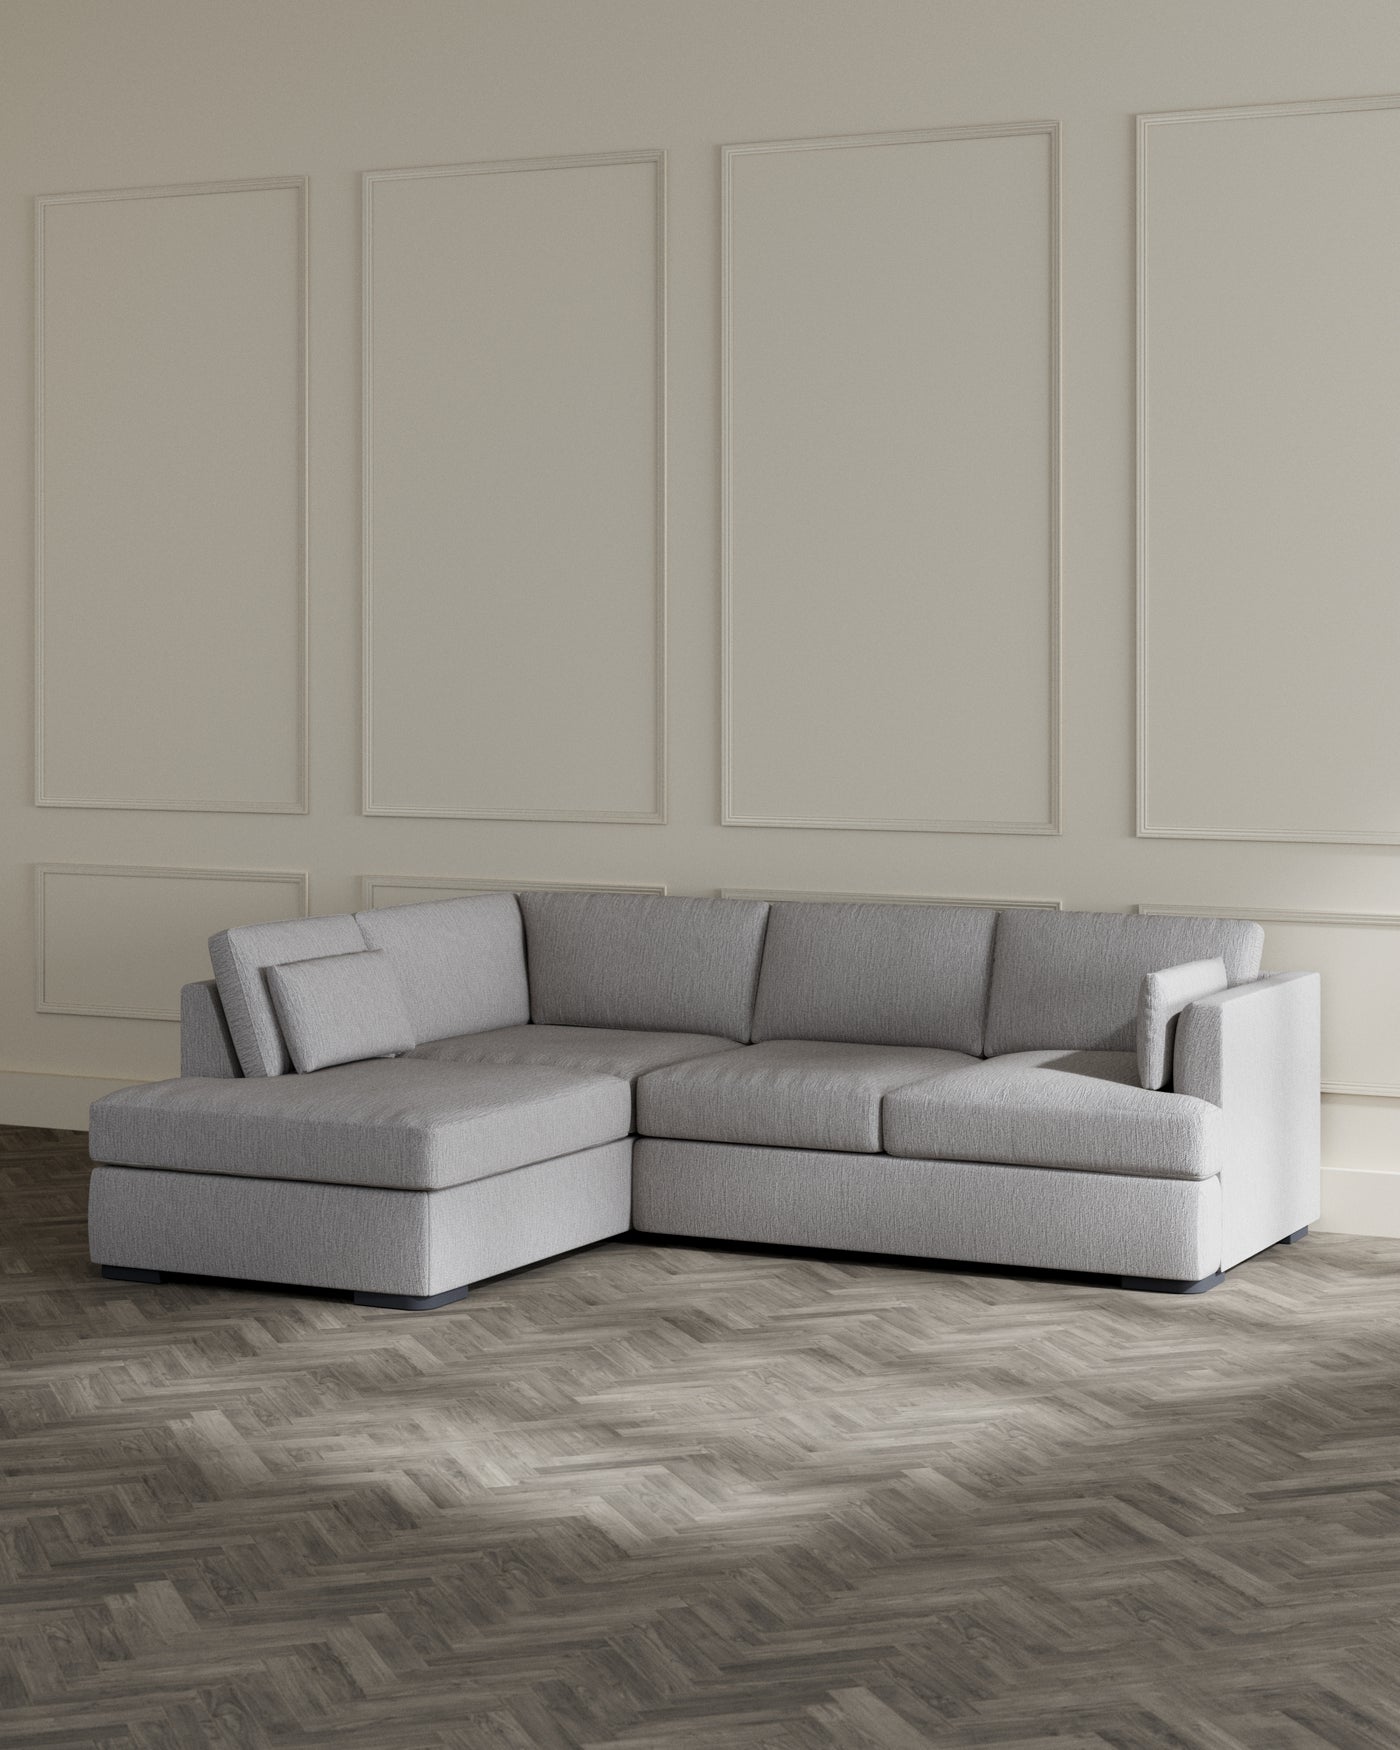 Modern L-shaped sectional sofa in light grey fabric with a chaise lounge extension, set against a classic panelled wall in a room with herringbone wooden flooring.